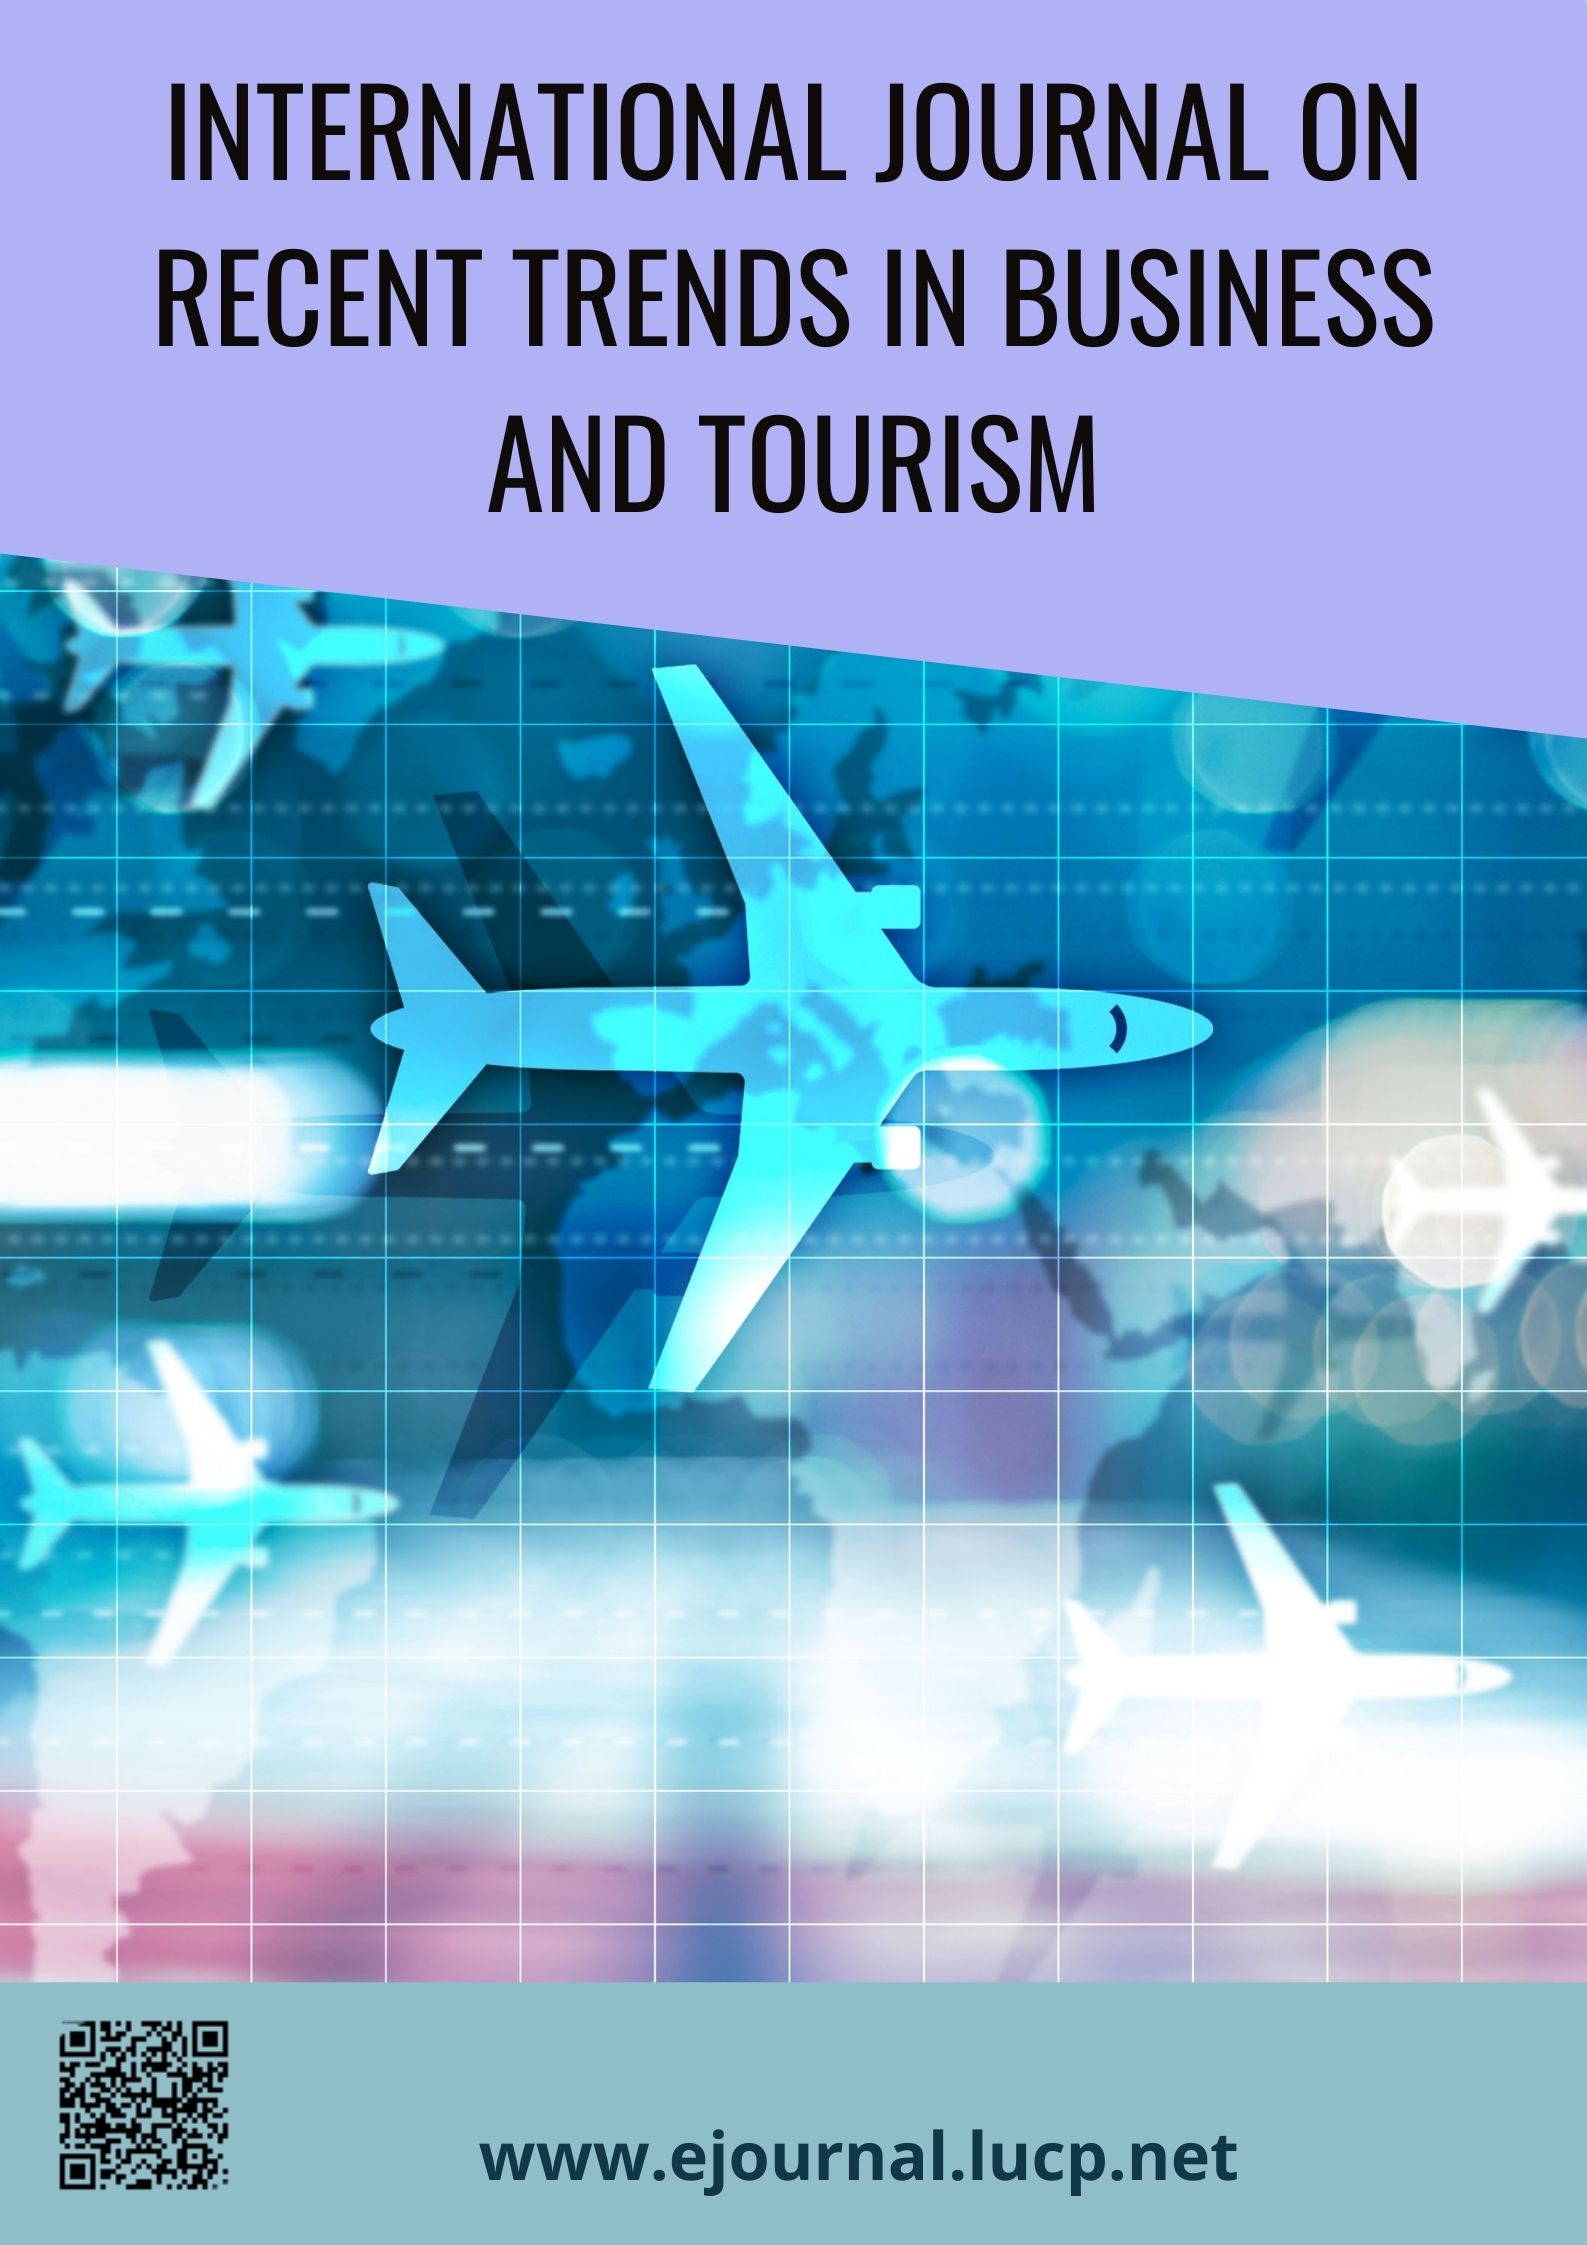 International Journal on Recent Trends in Business and Tourism